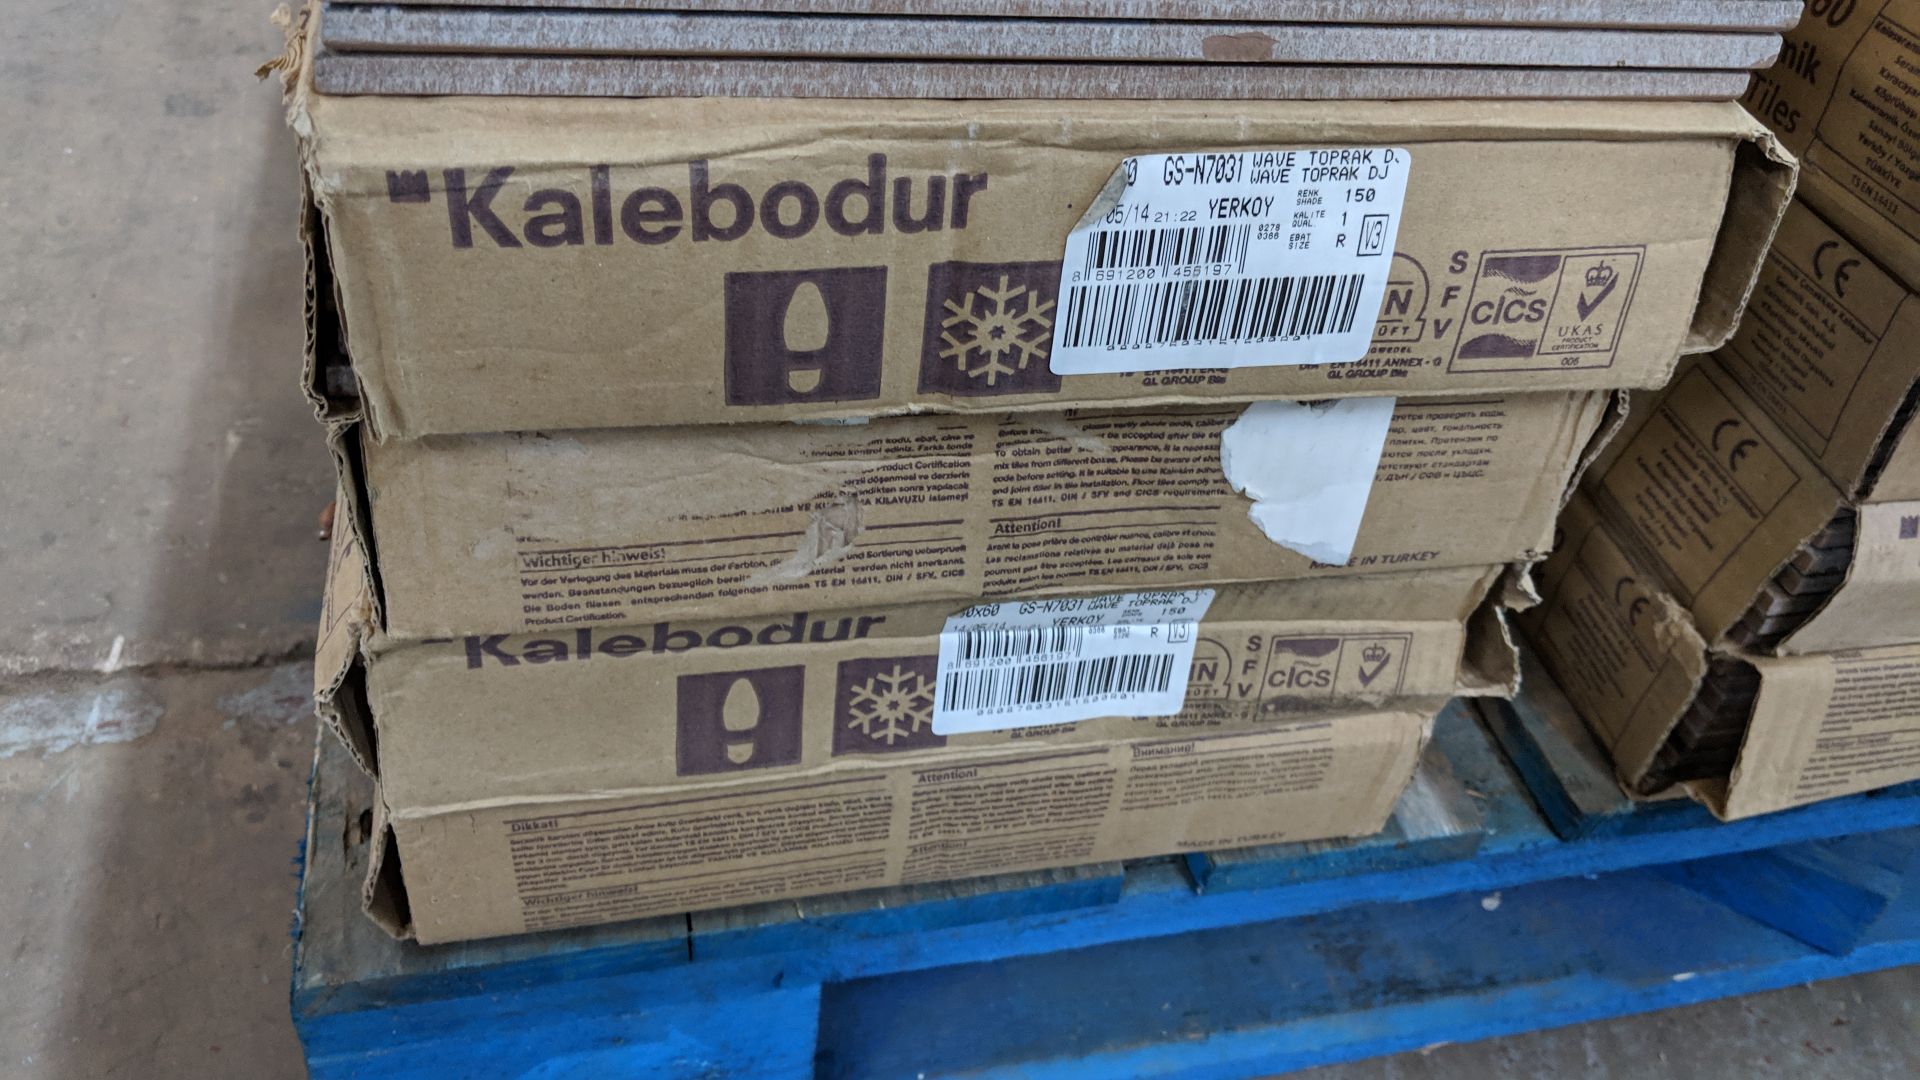 Approx. 11 boxes of Kalebodur high quality floor/wall tiles, each box containing approx. 1.26sq m of - Bild 4 aus 6